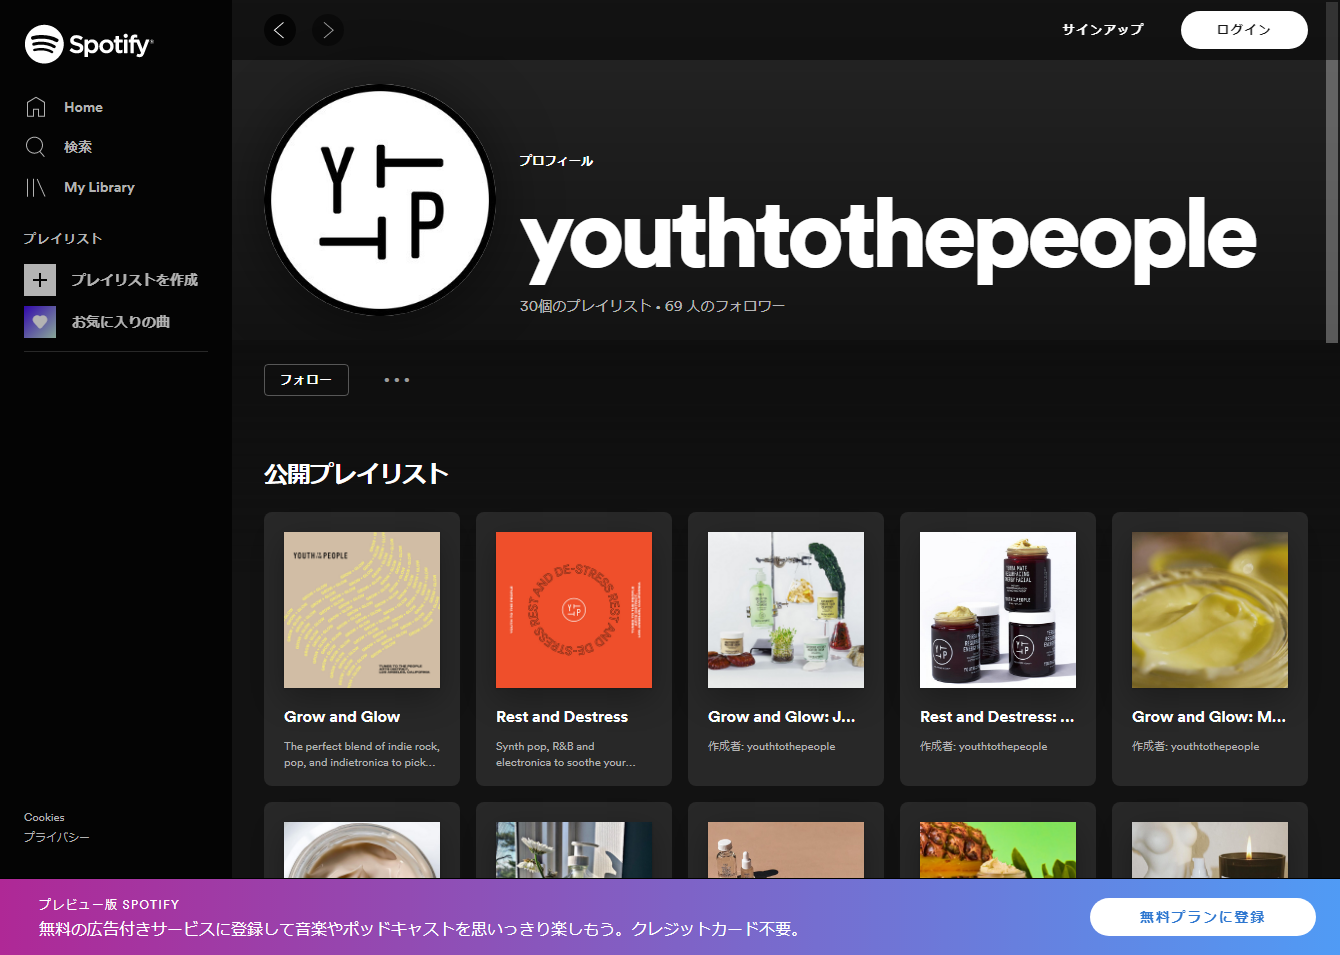 YouthToThePeople_2_2020-07-22_154714_open.spotify.com.png